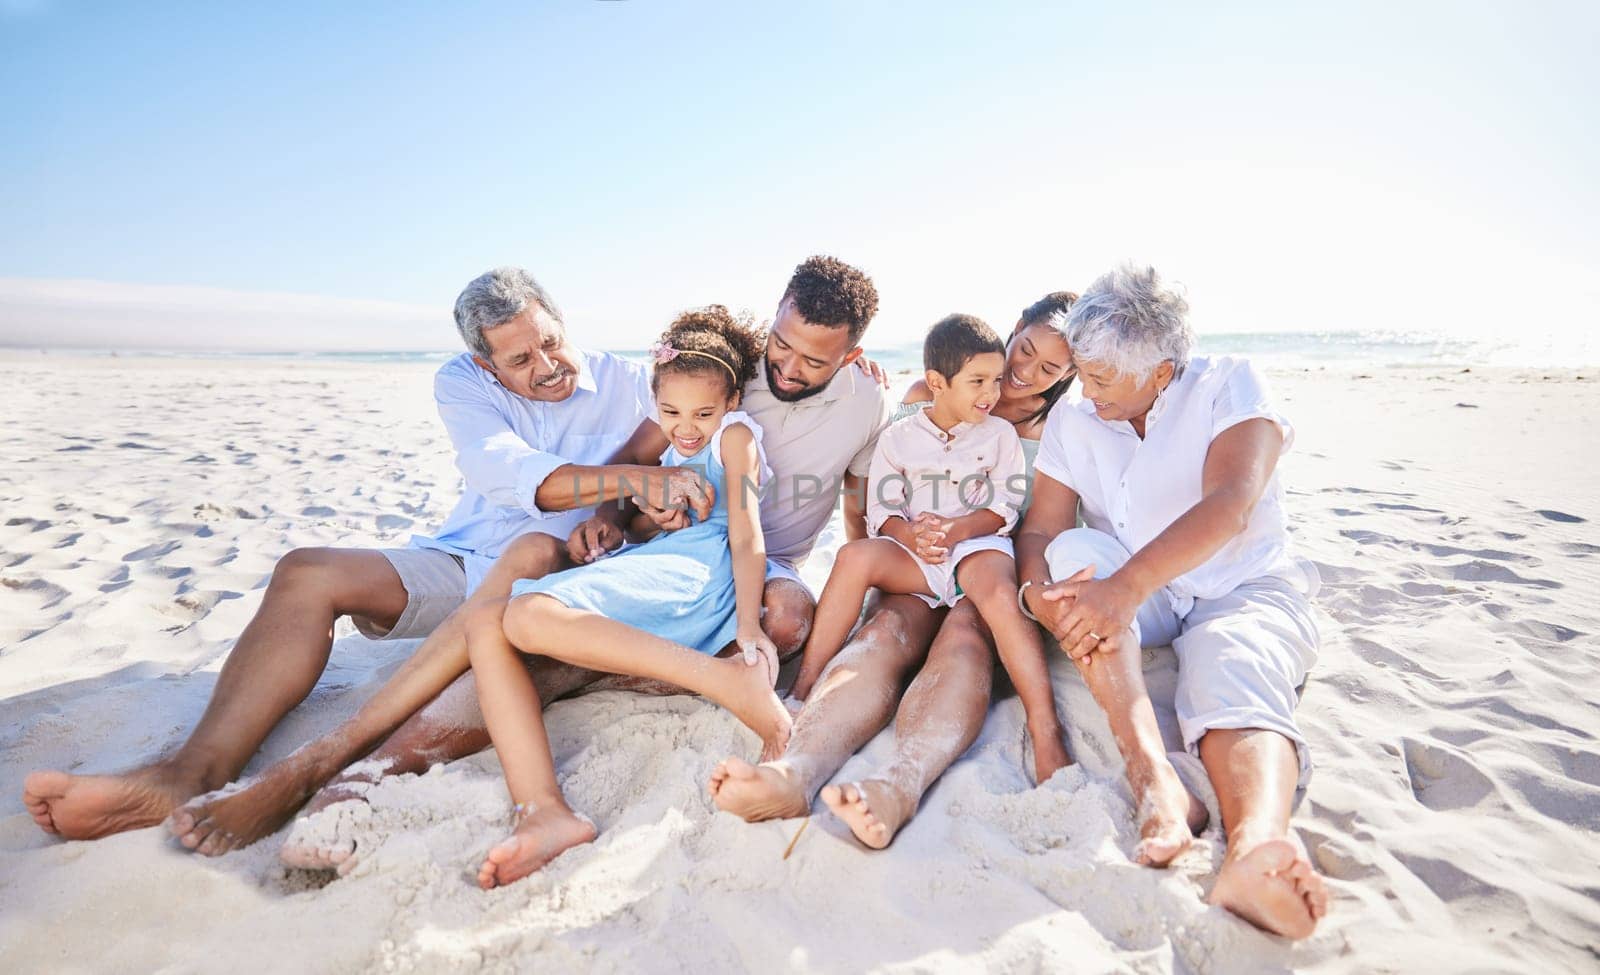 Vacation, travel or big family on beach to relax in nature bonding to enjoy quality time in summer. Happy kids, wellness or children laughing with grandparents, father or mother by ocean on holiday.